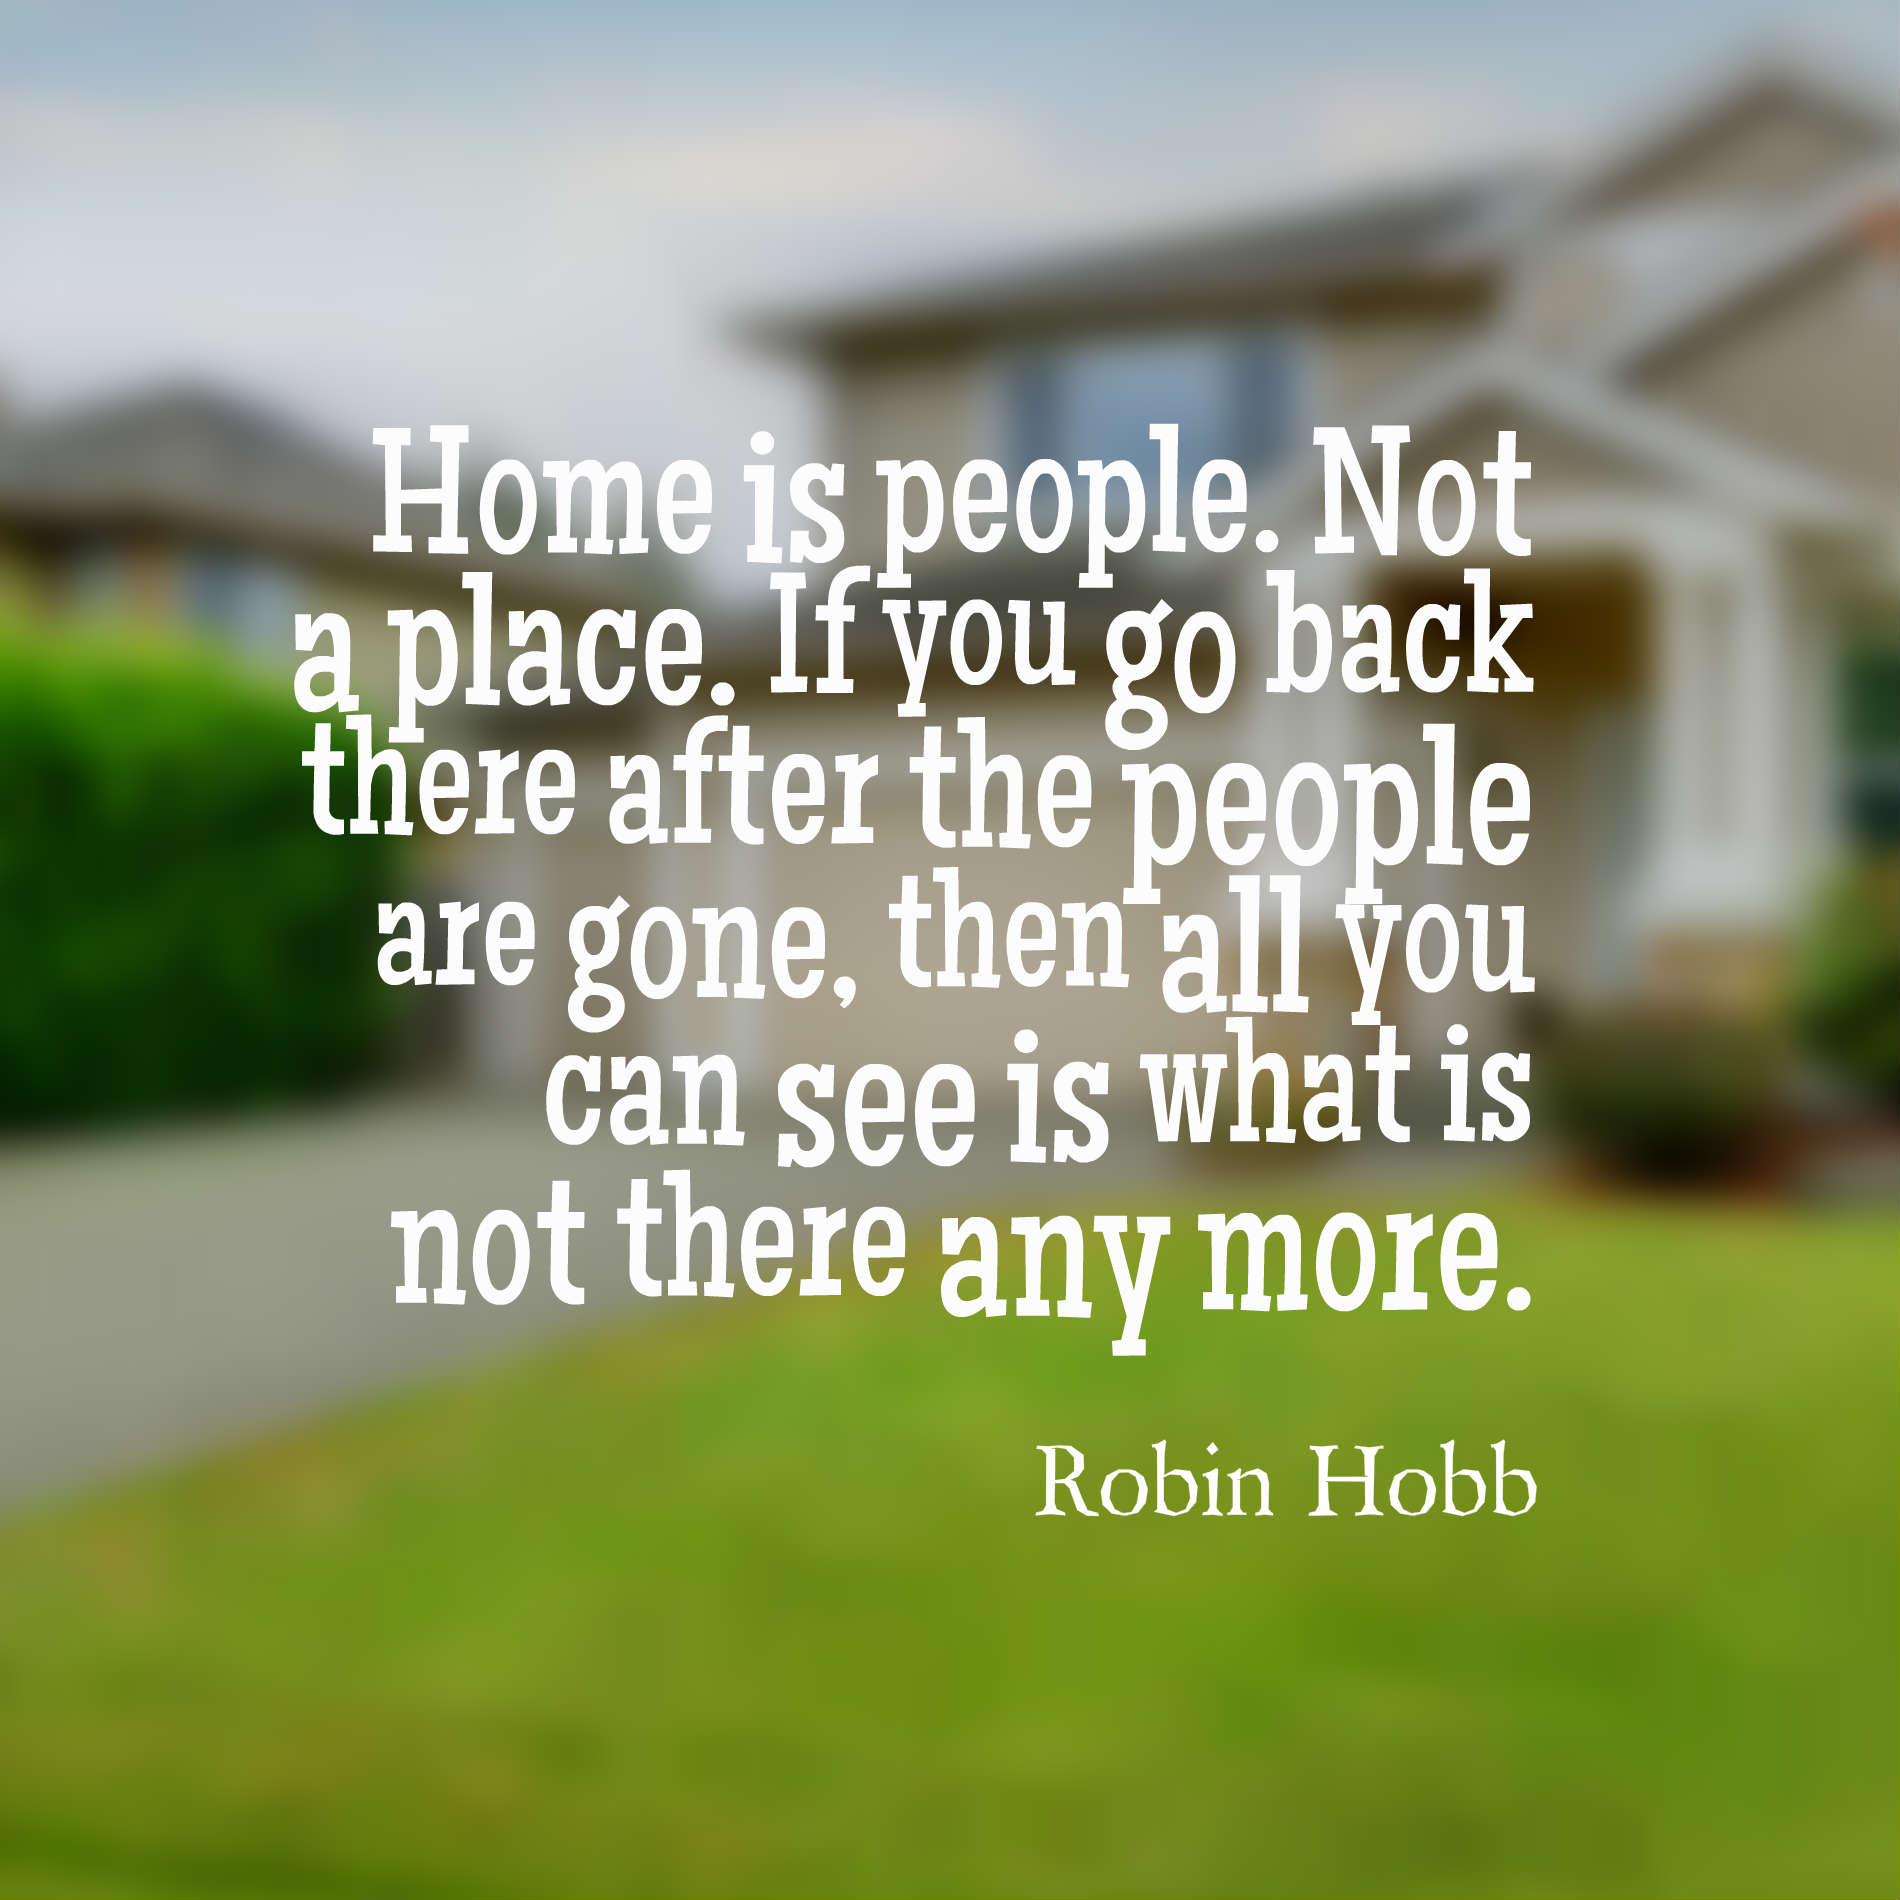 Home is people. Not a place. If you go back there after the people are gone, then all you can see is what is not there any more.